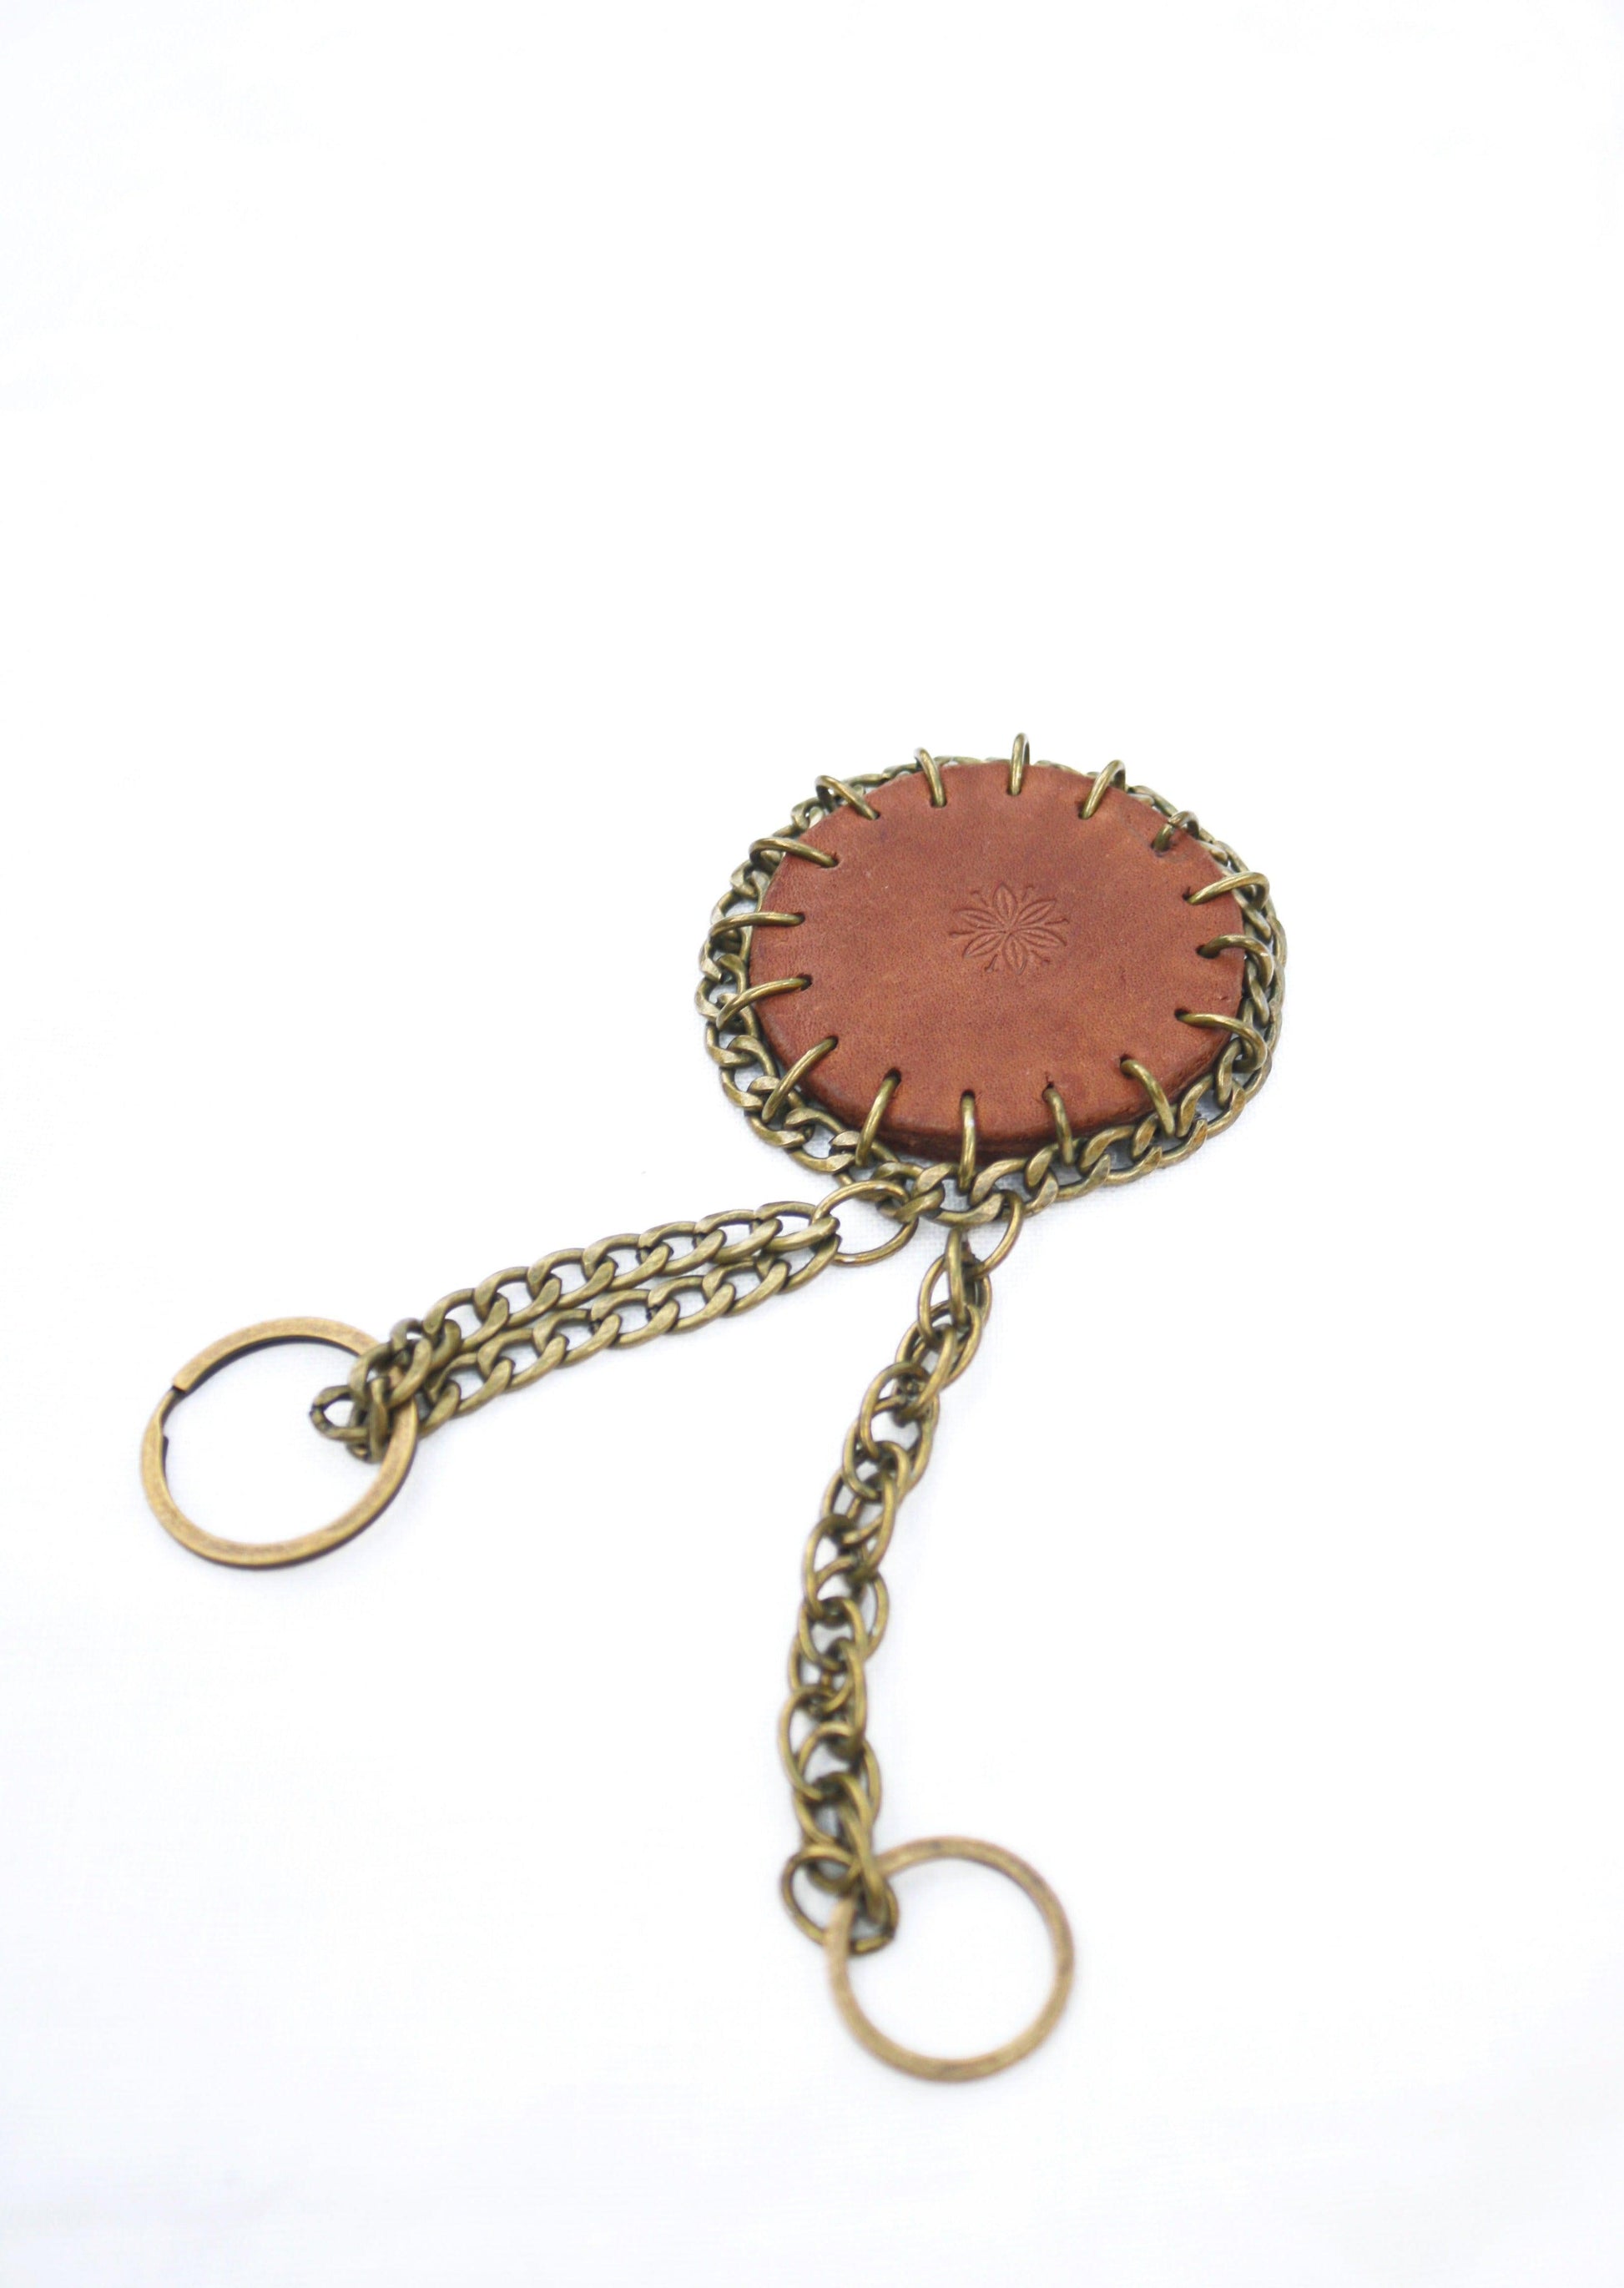 Leather with a metal chain keyring - ORIEN VIN TIQUE